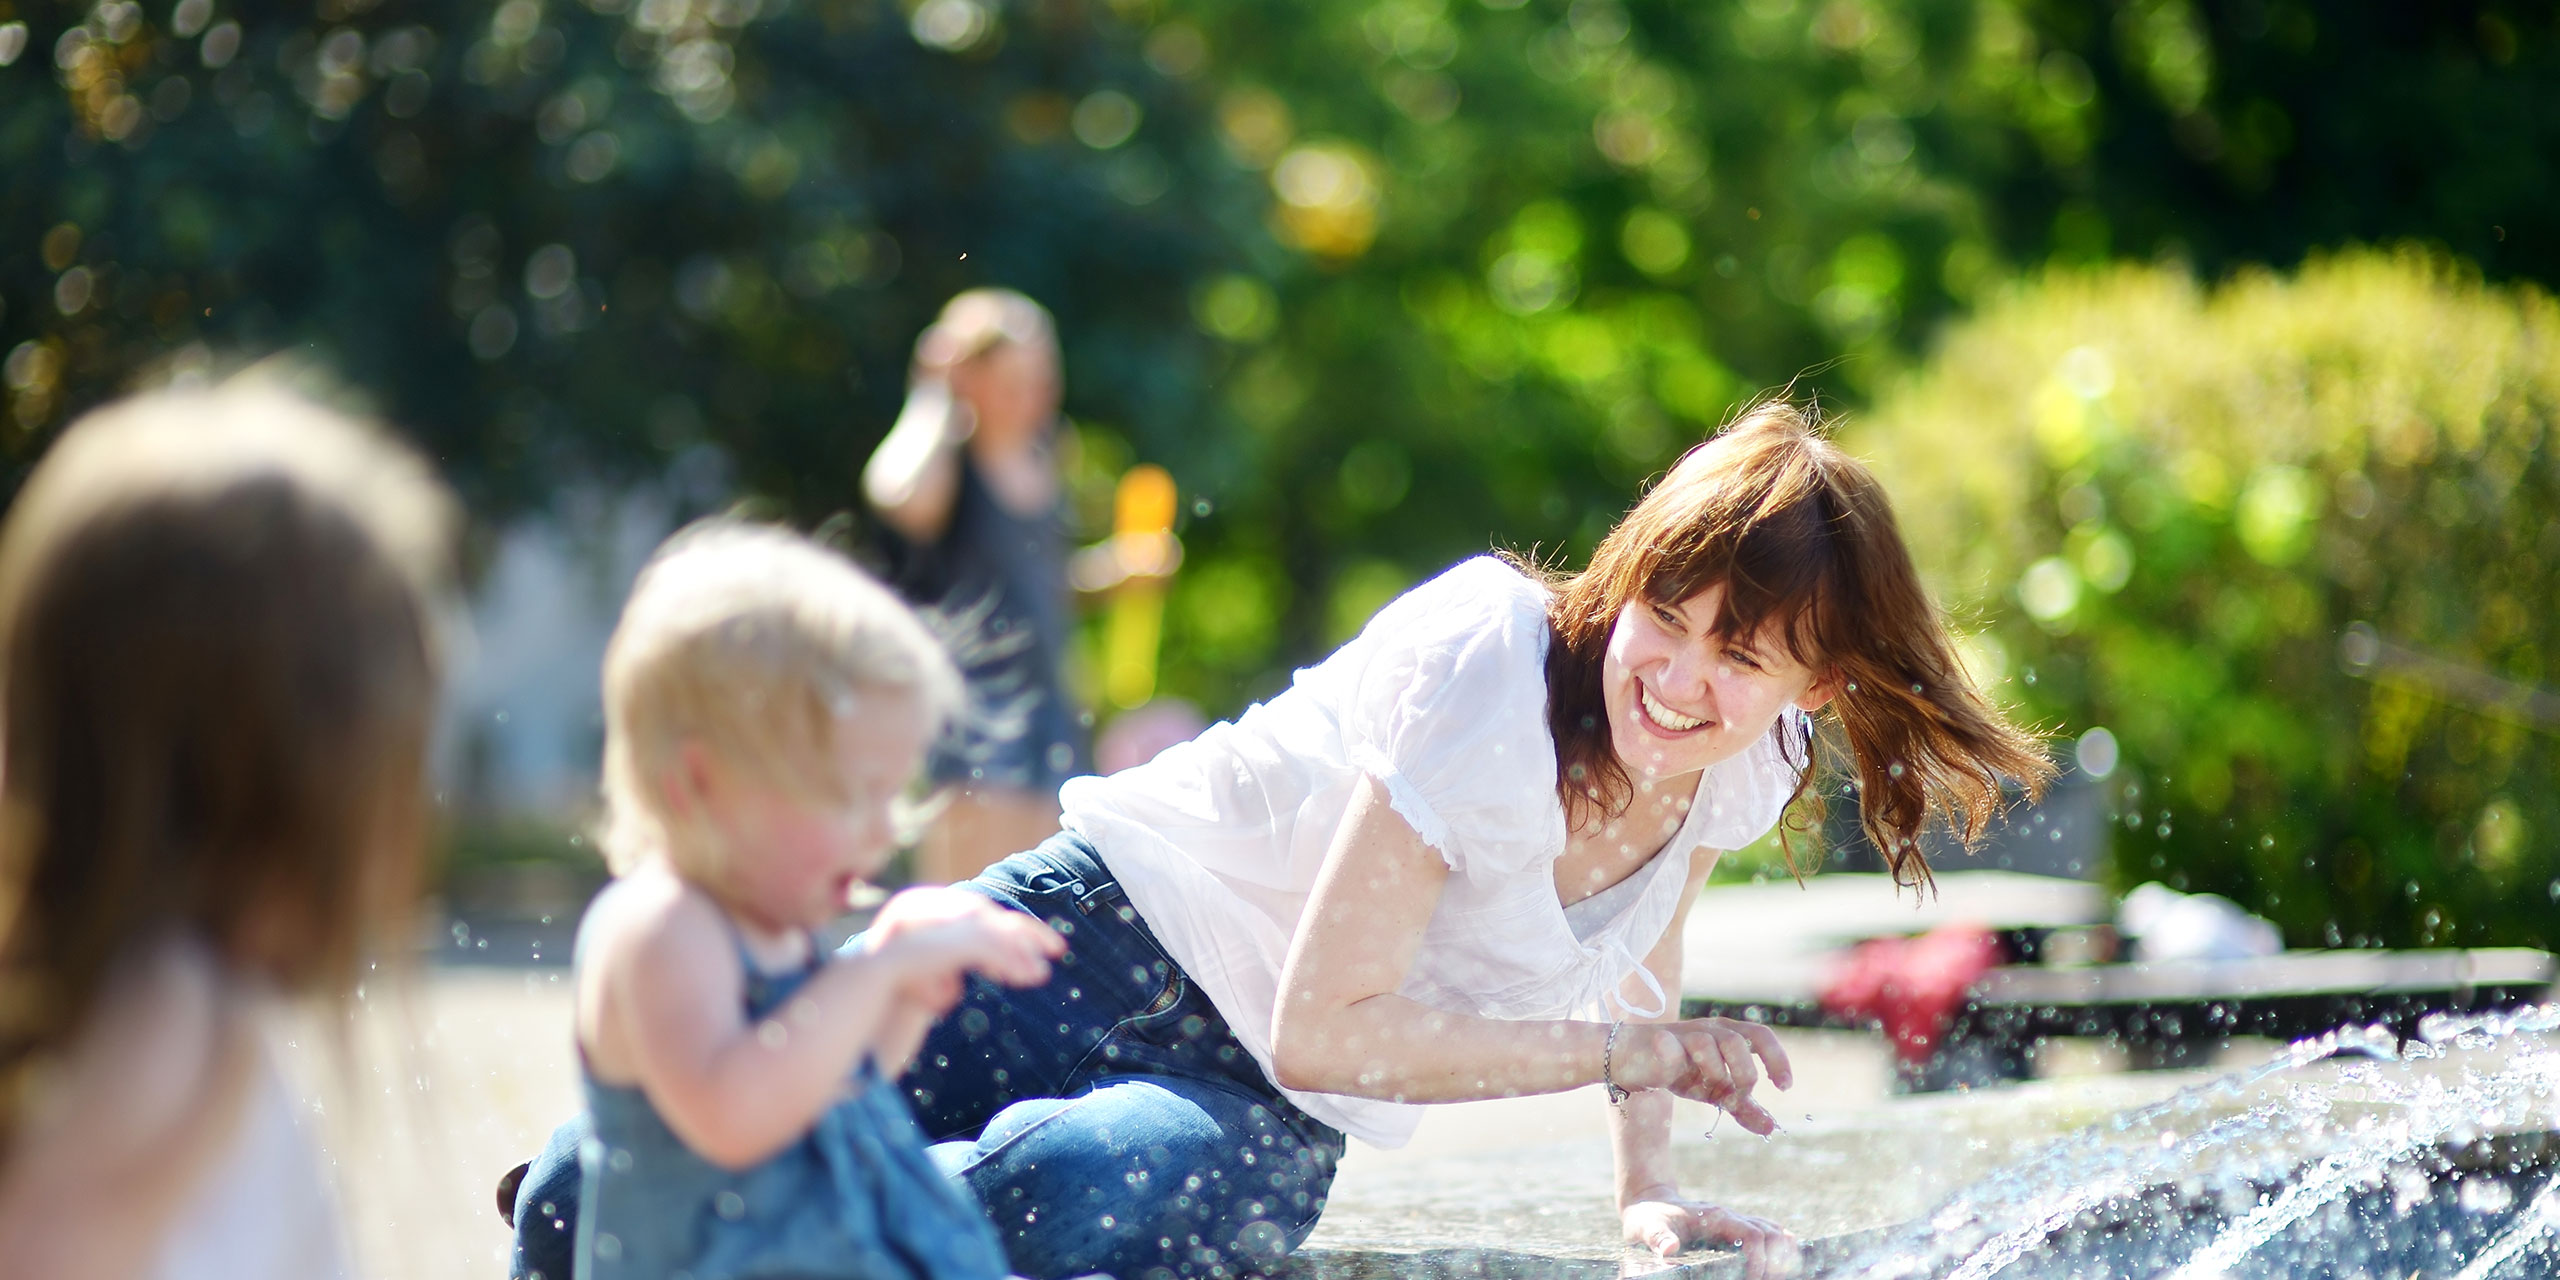 Mom Splashing With Kids at Fountain in City; Courtesy of MNStudio/Shutterstock.com